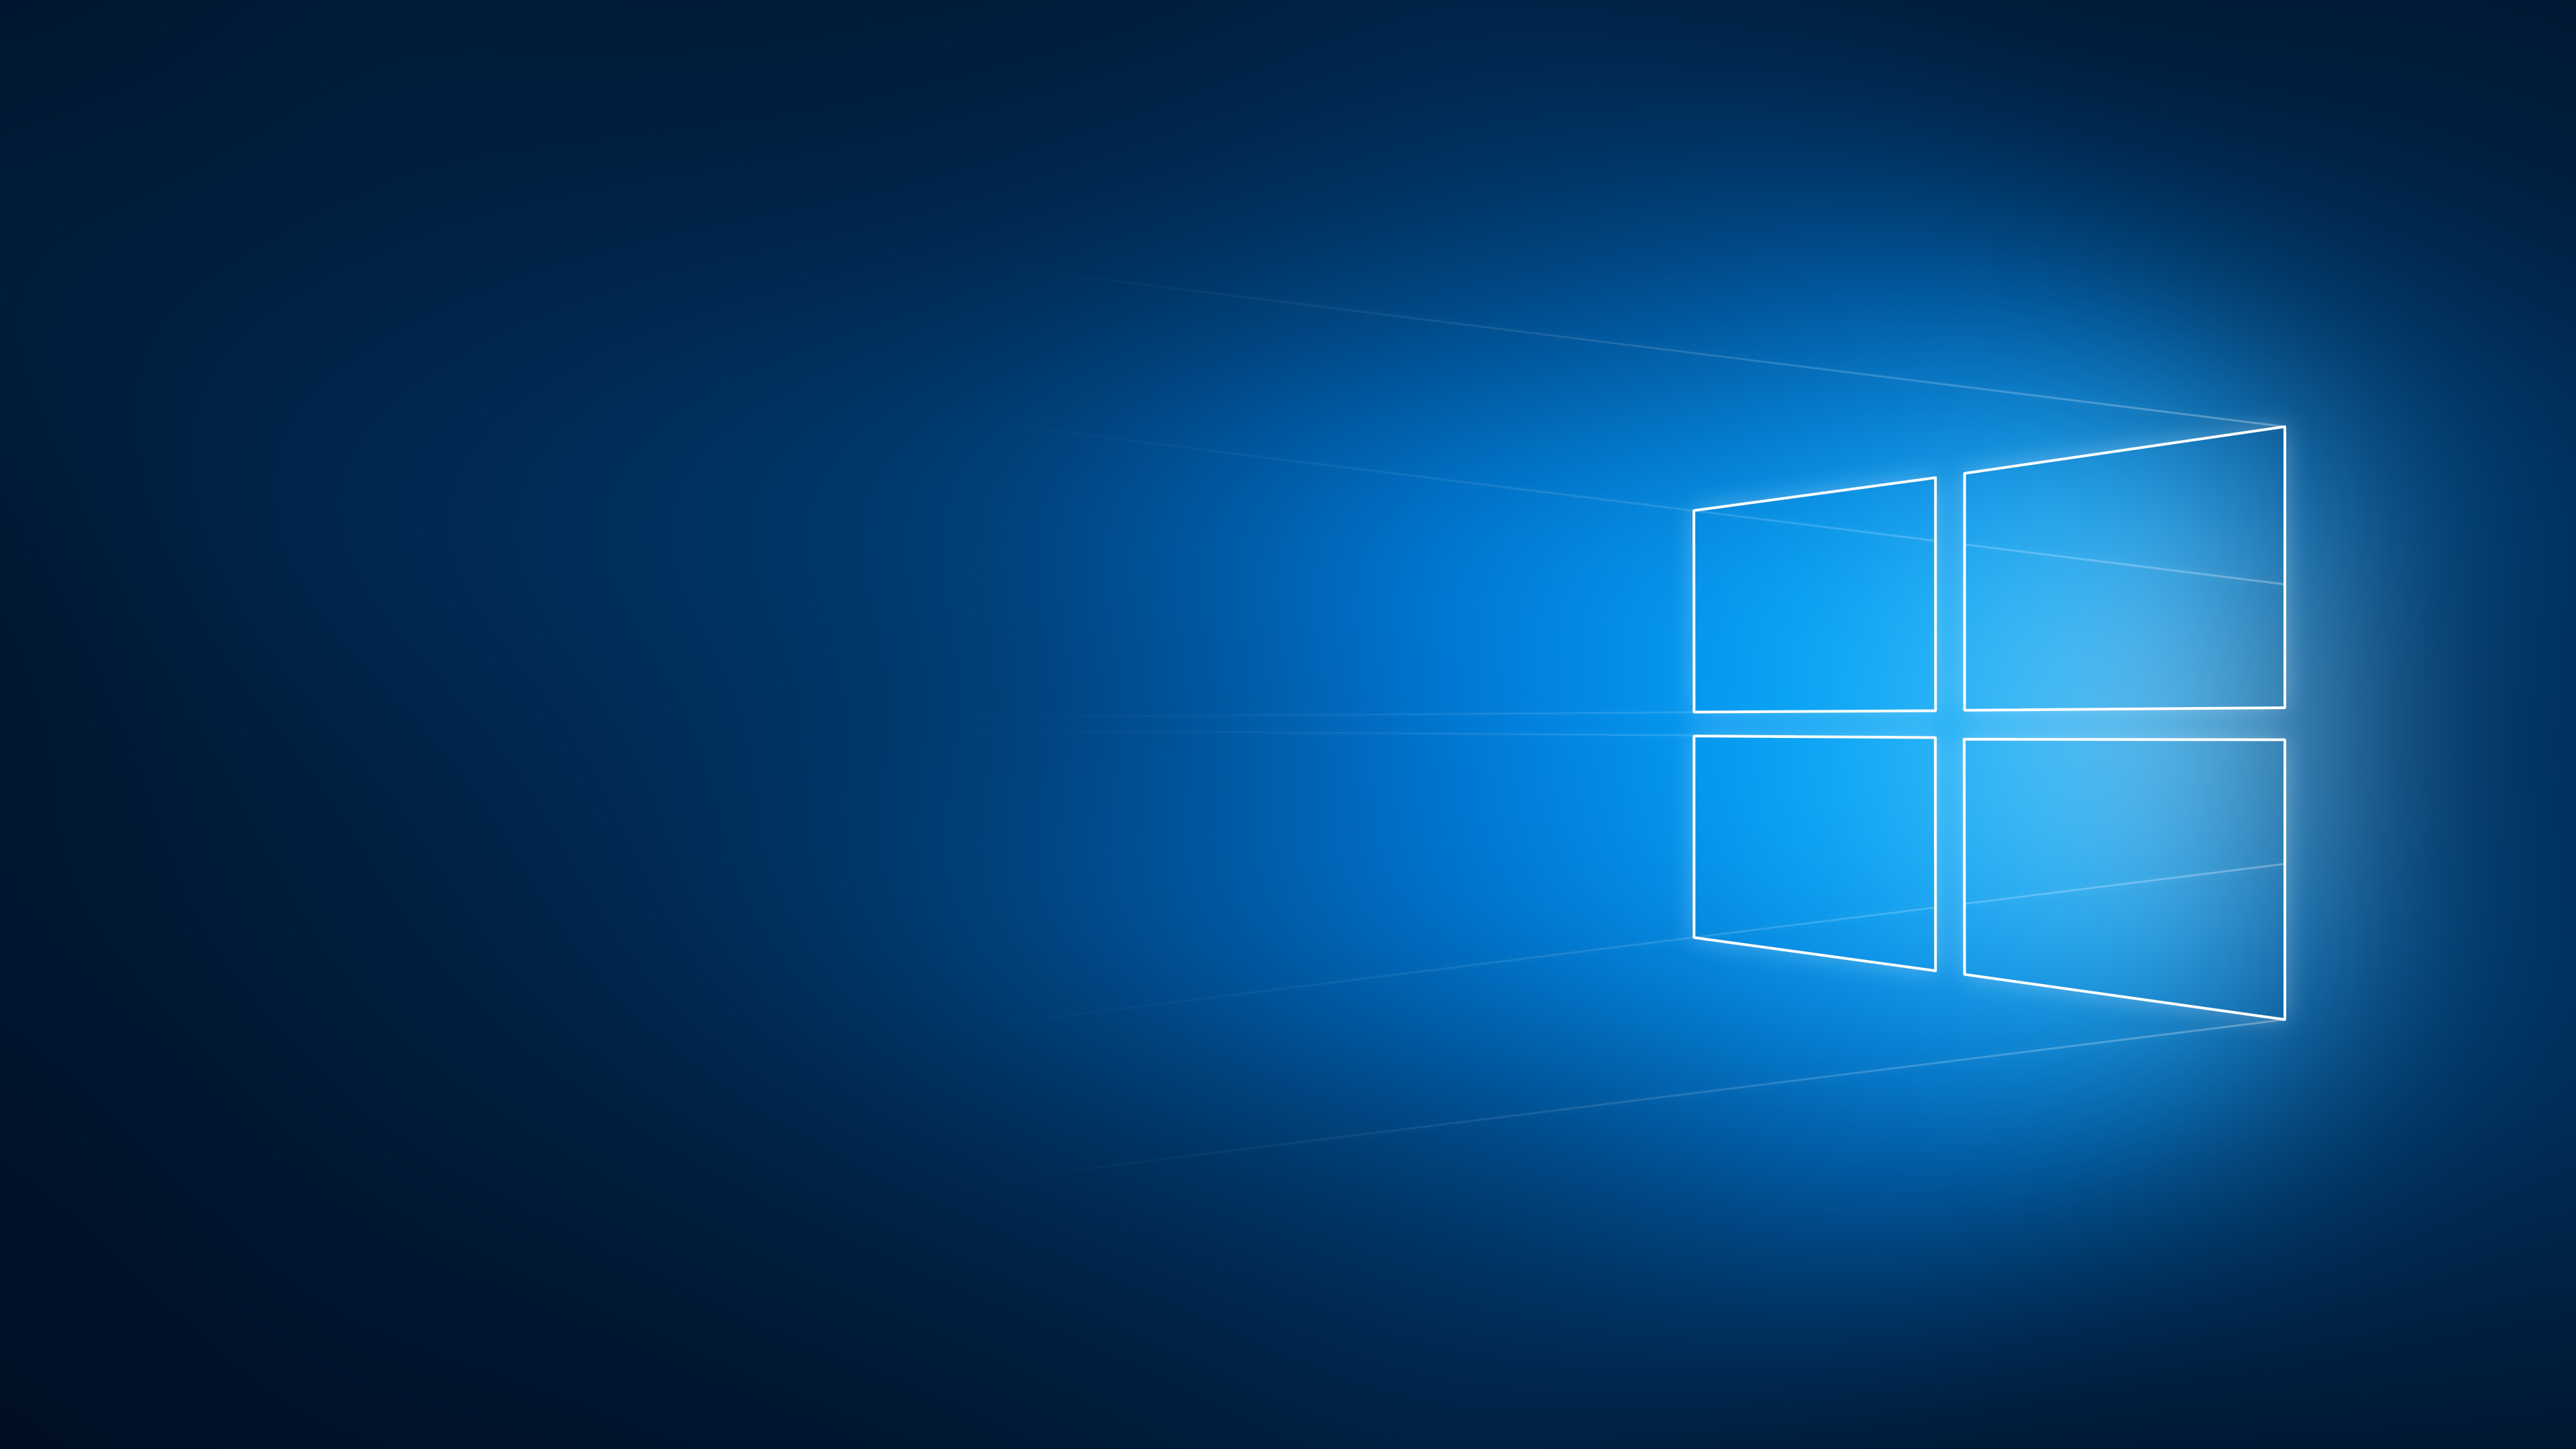 1280x800 Windows 10 Hero Logo 1280x800 Resolution Wallpaper Hd Brands 4k Wallpapers Images Photos And Background